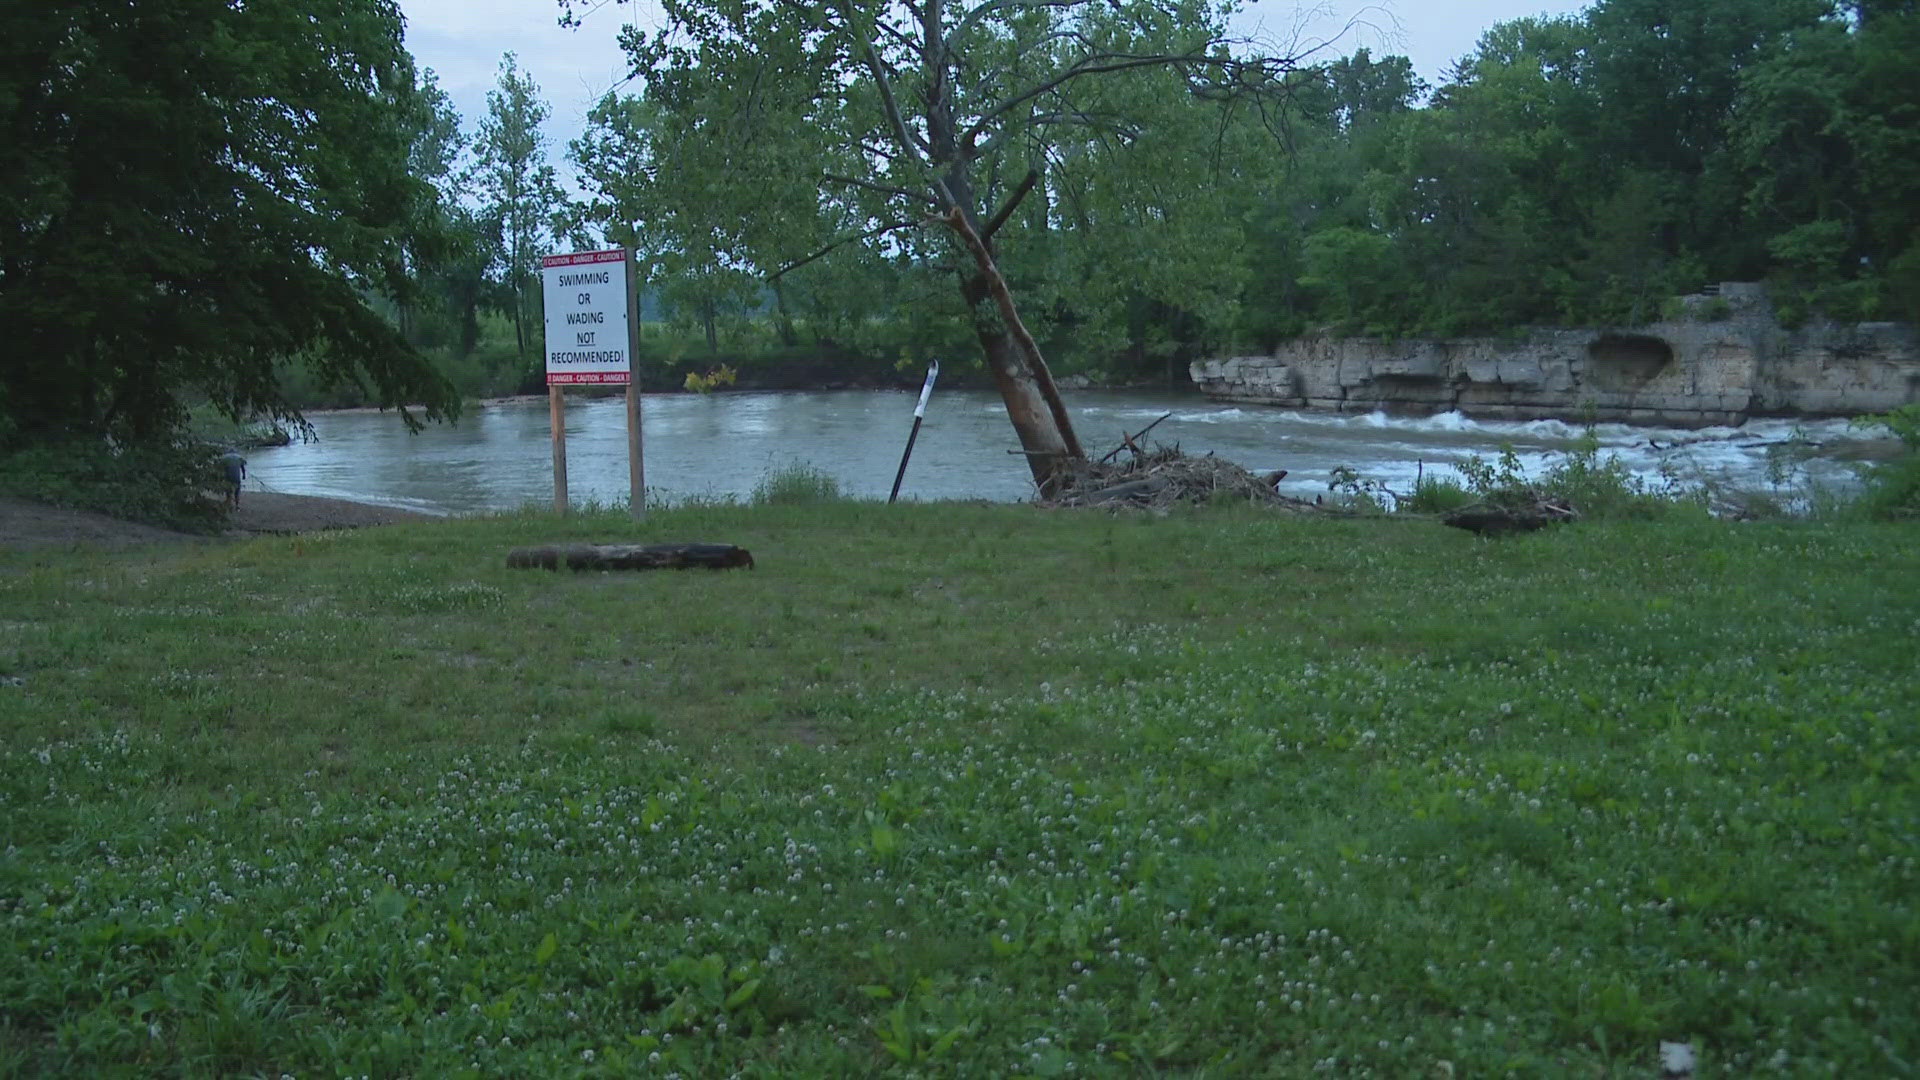 A bystander pulled a man from the rough waters of the Big River before first responders arrived. He was barely conscious when taken to the hospital.